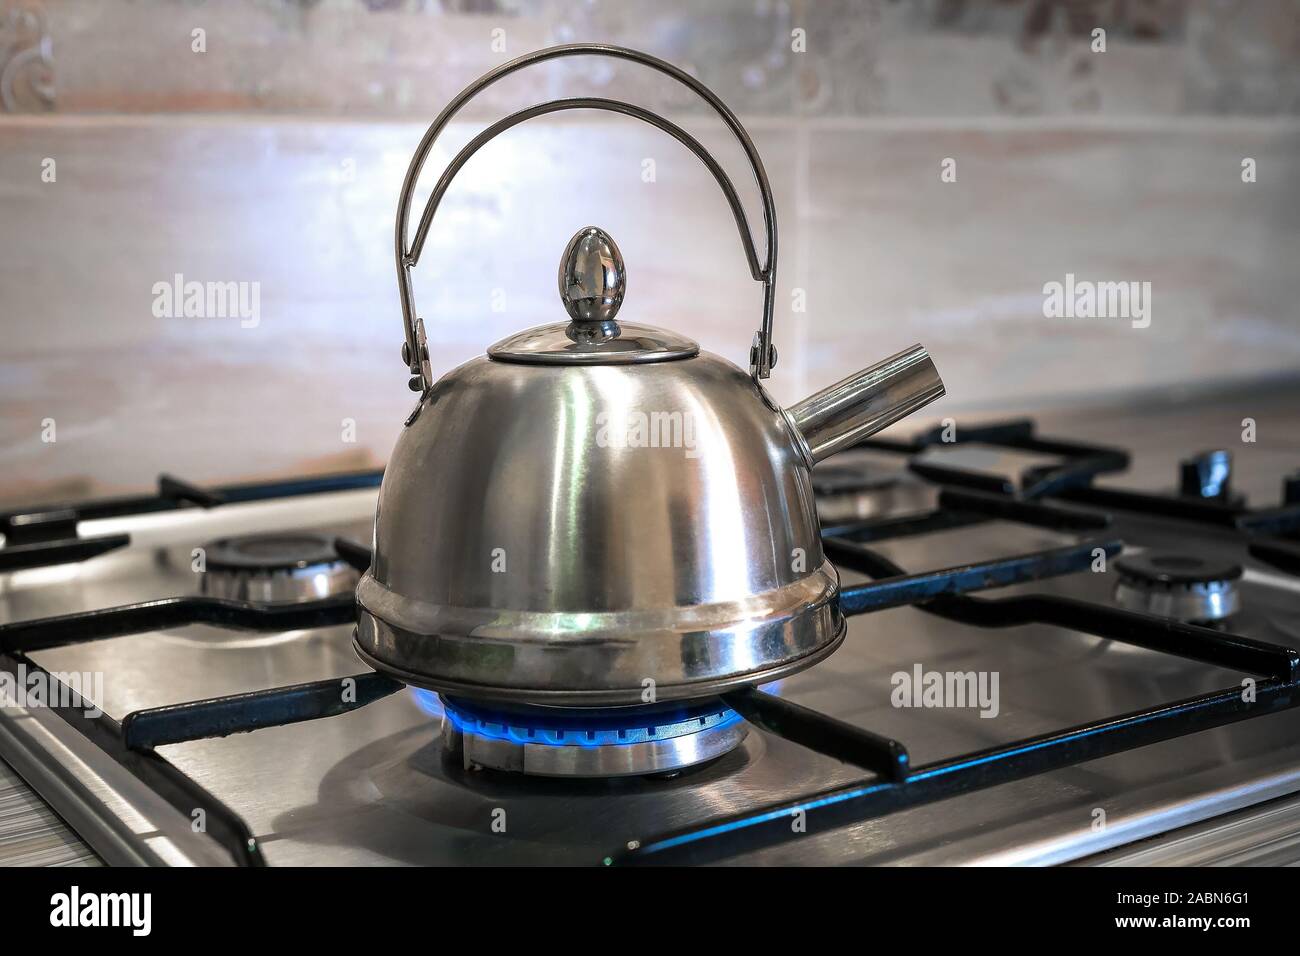 how to boil water in a tea kettle